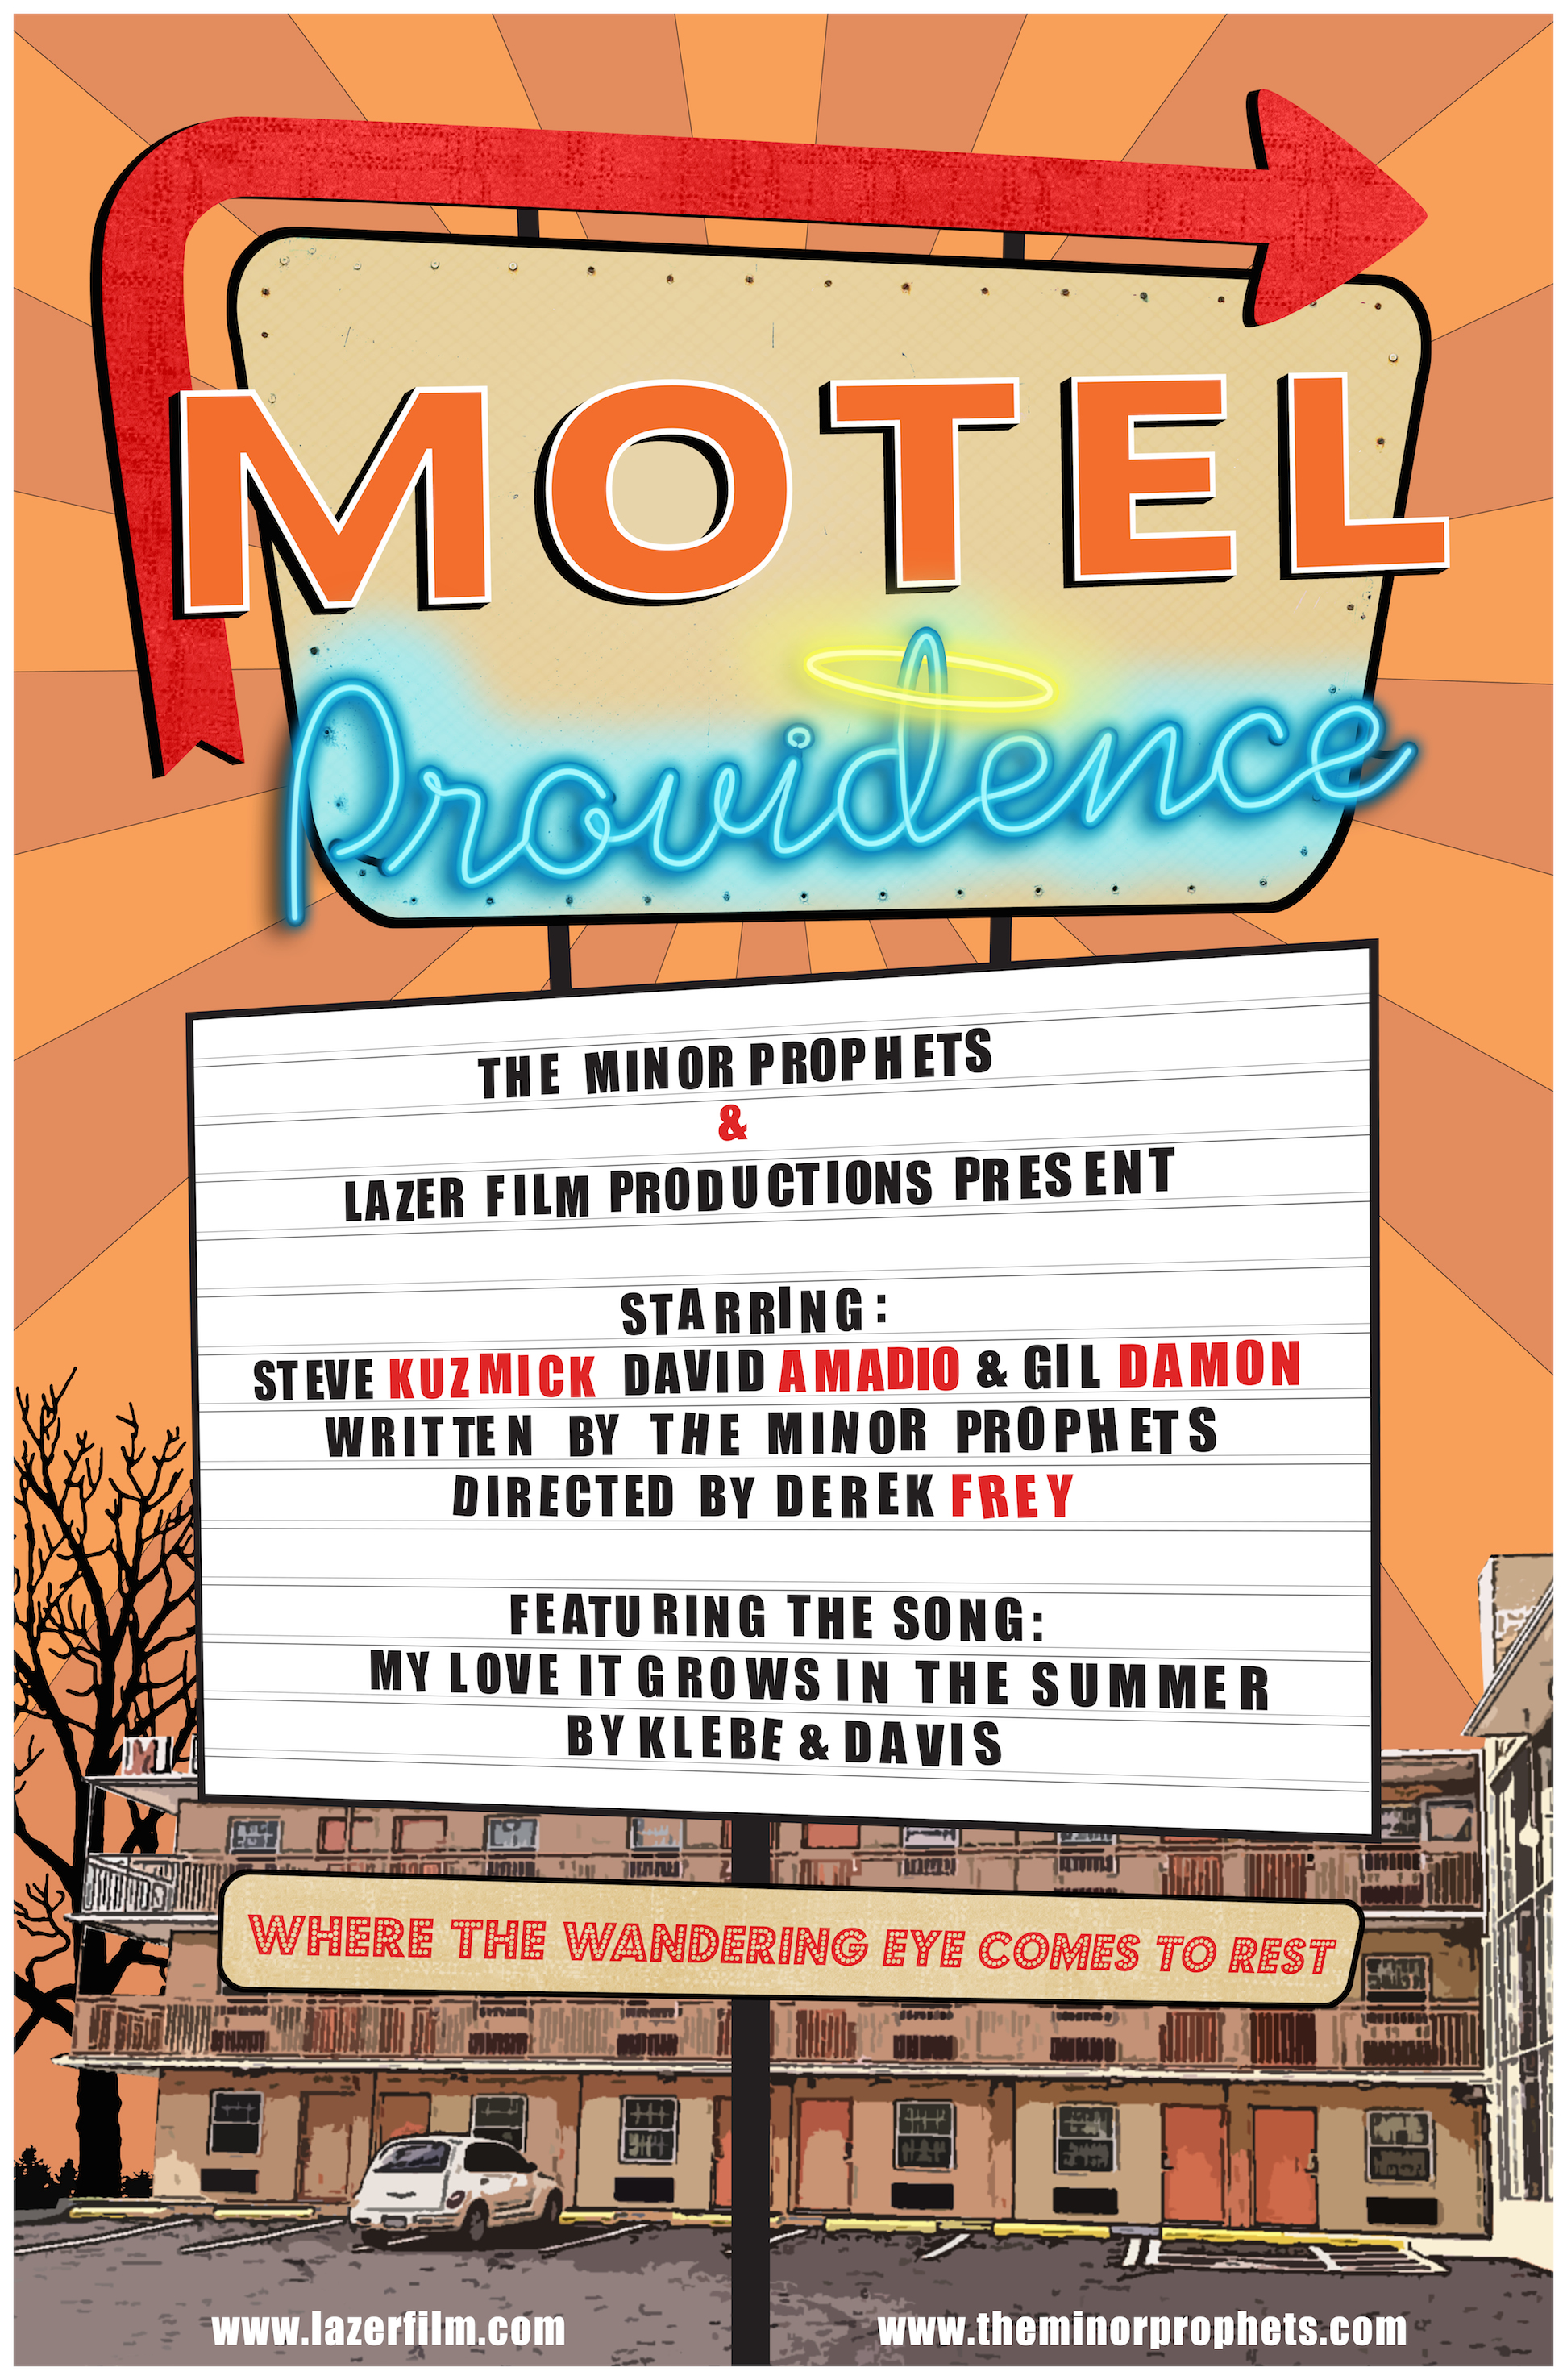 MOTEL PROVIDENCE - Official One Sheet. Directed by Derek Frey Written by and Starring the Minor Prophets.